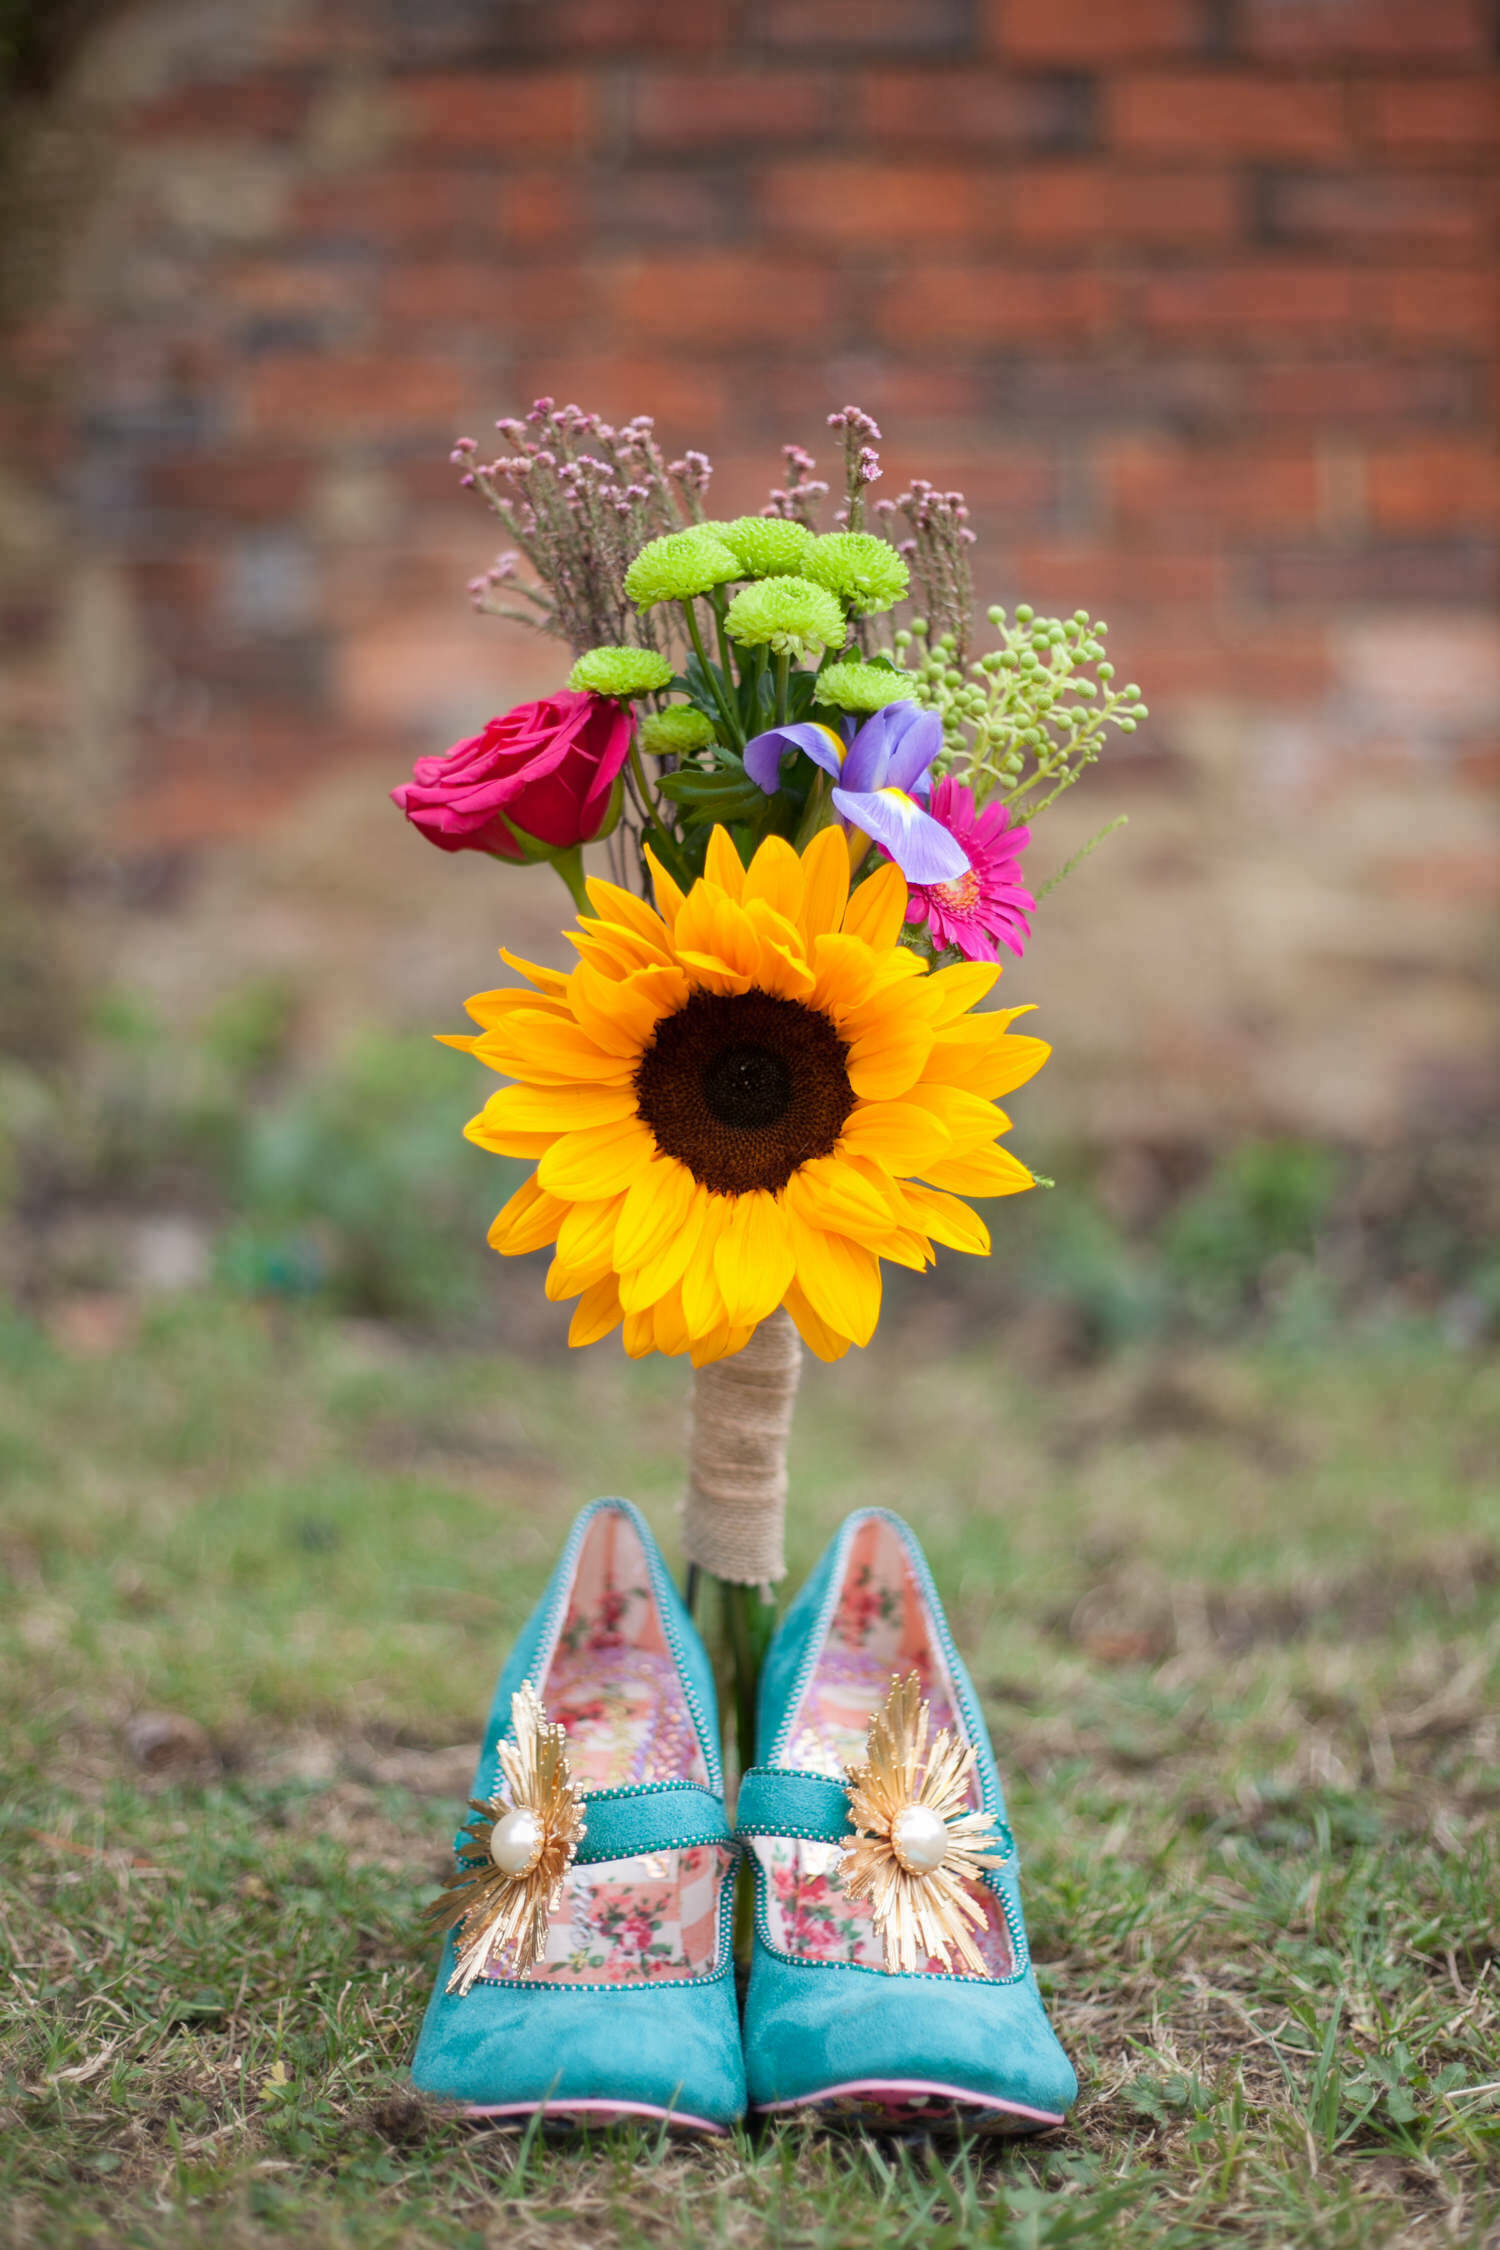 Colourful Barn Wedding Photography - bridal shoes and bouquet details taken at Gina & Simon's house in Milton Keynes